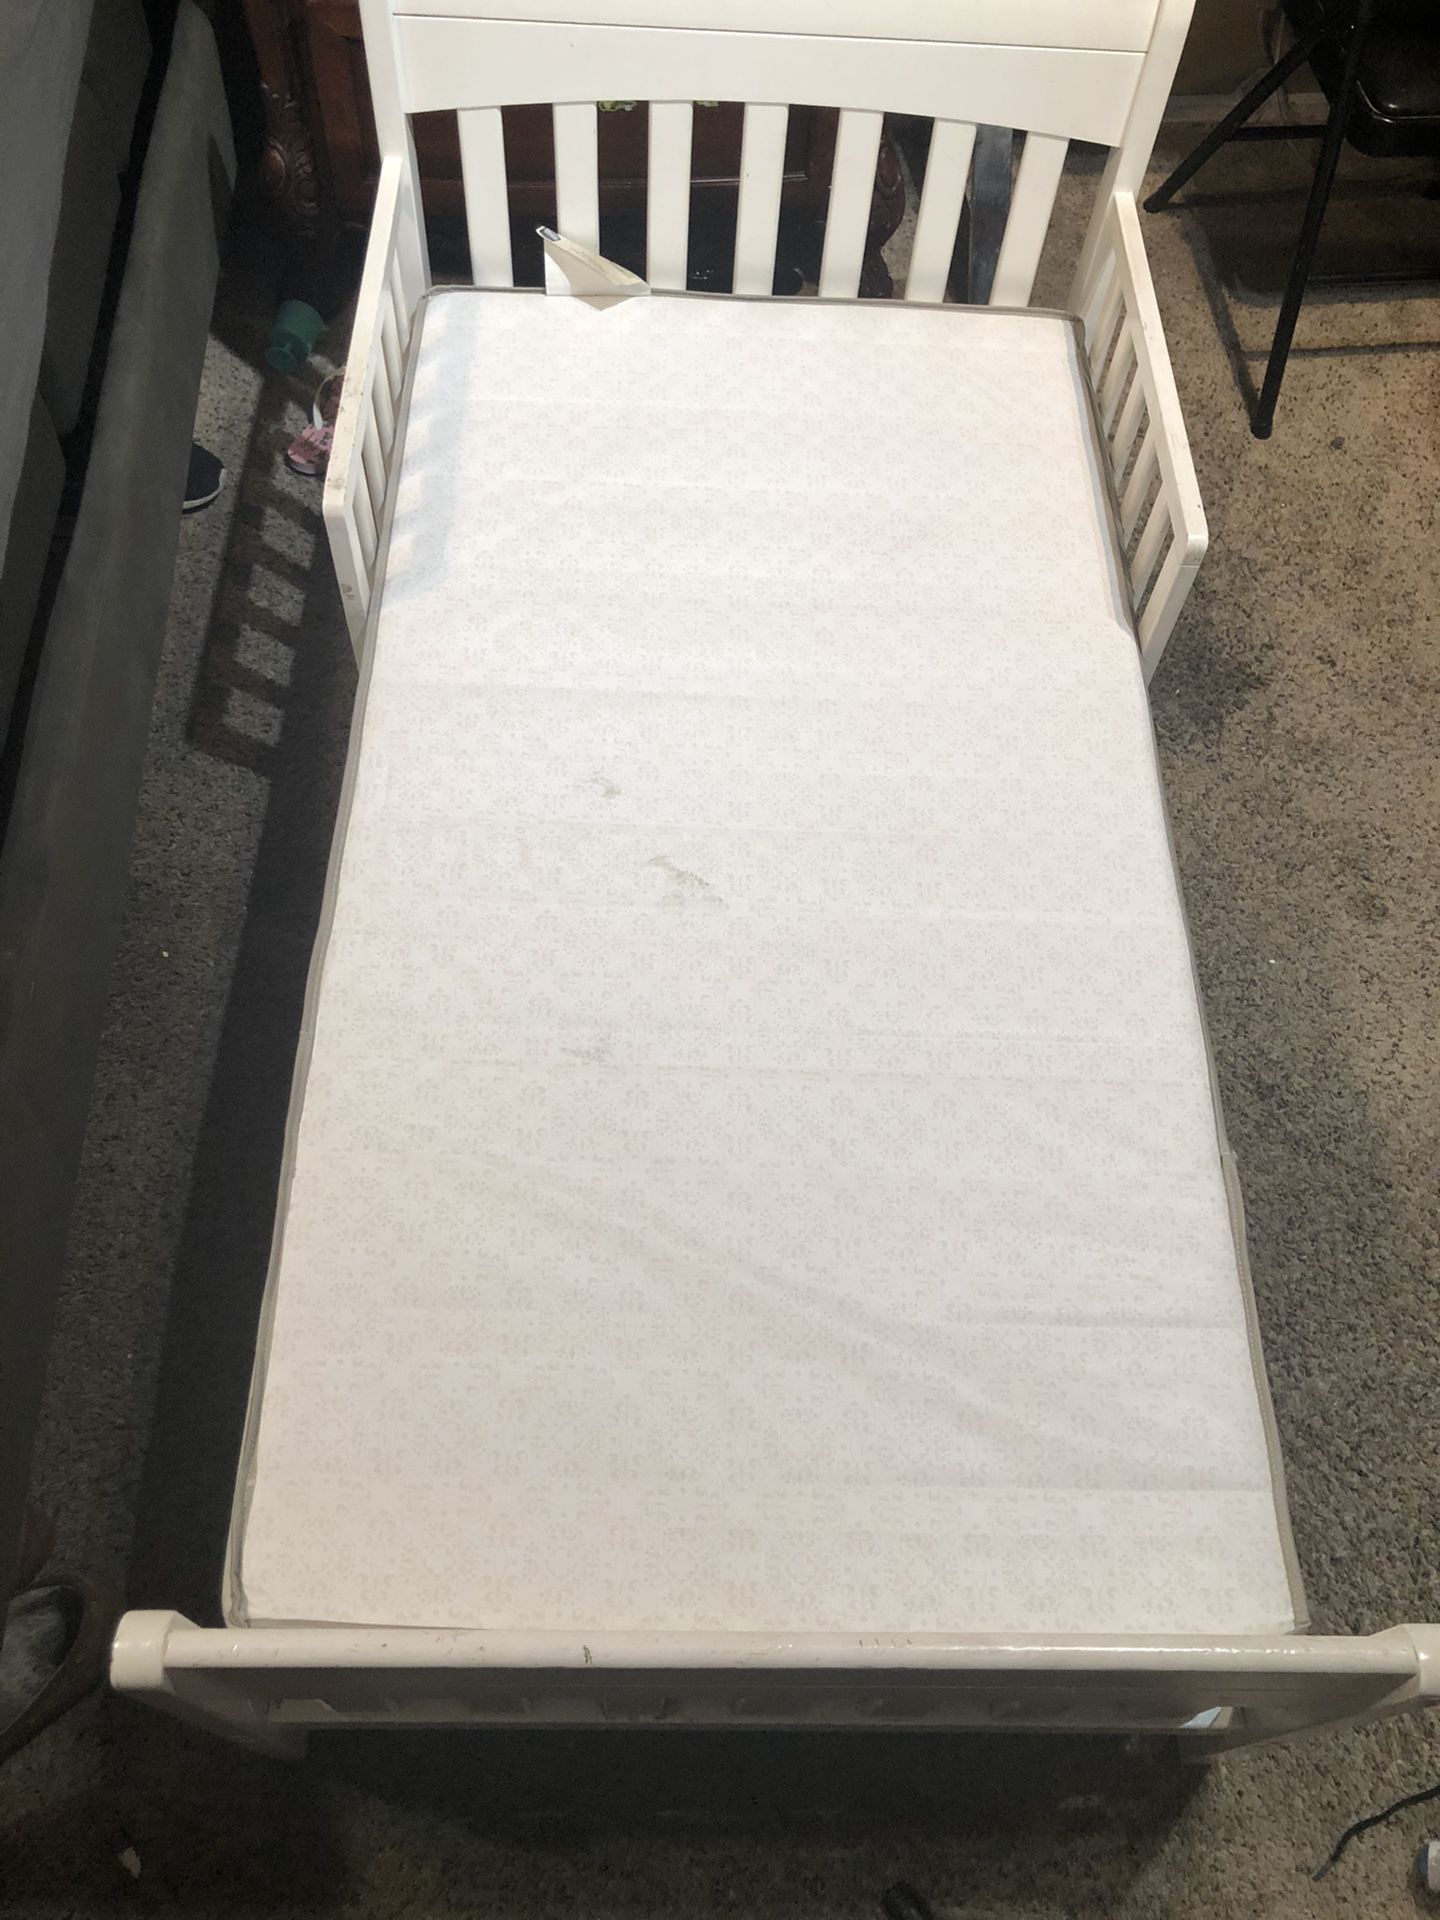 Toddler bed with mattress.